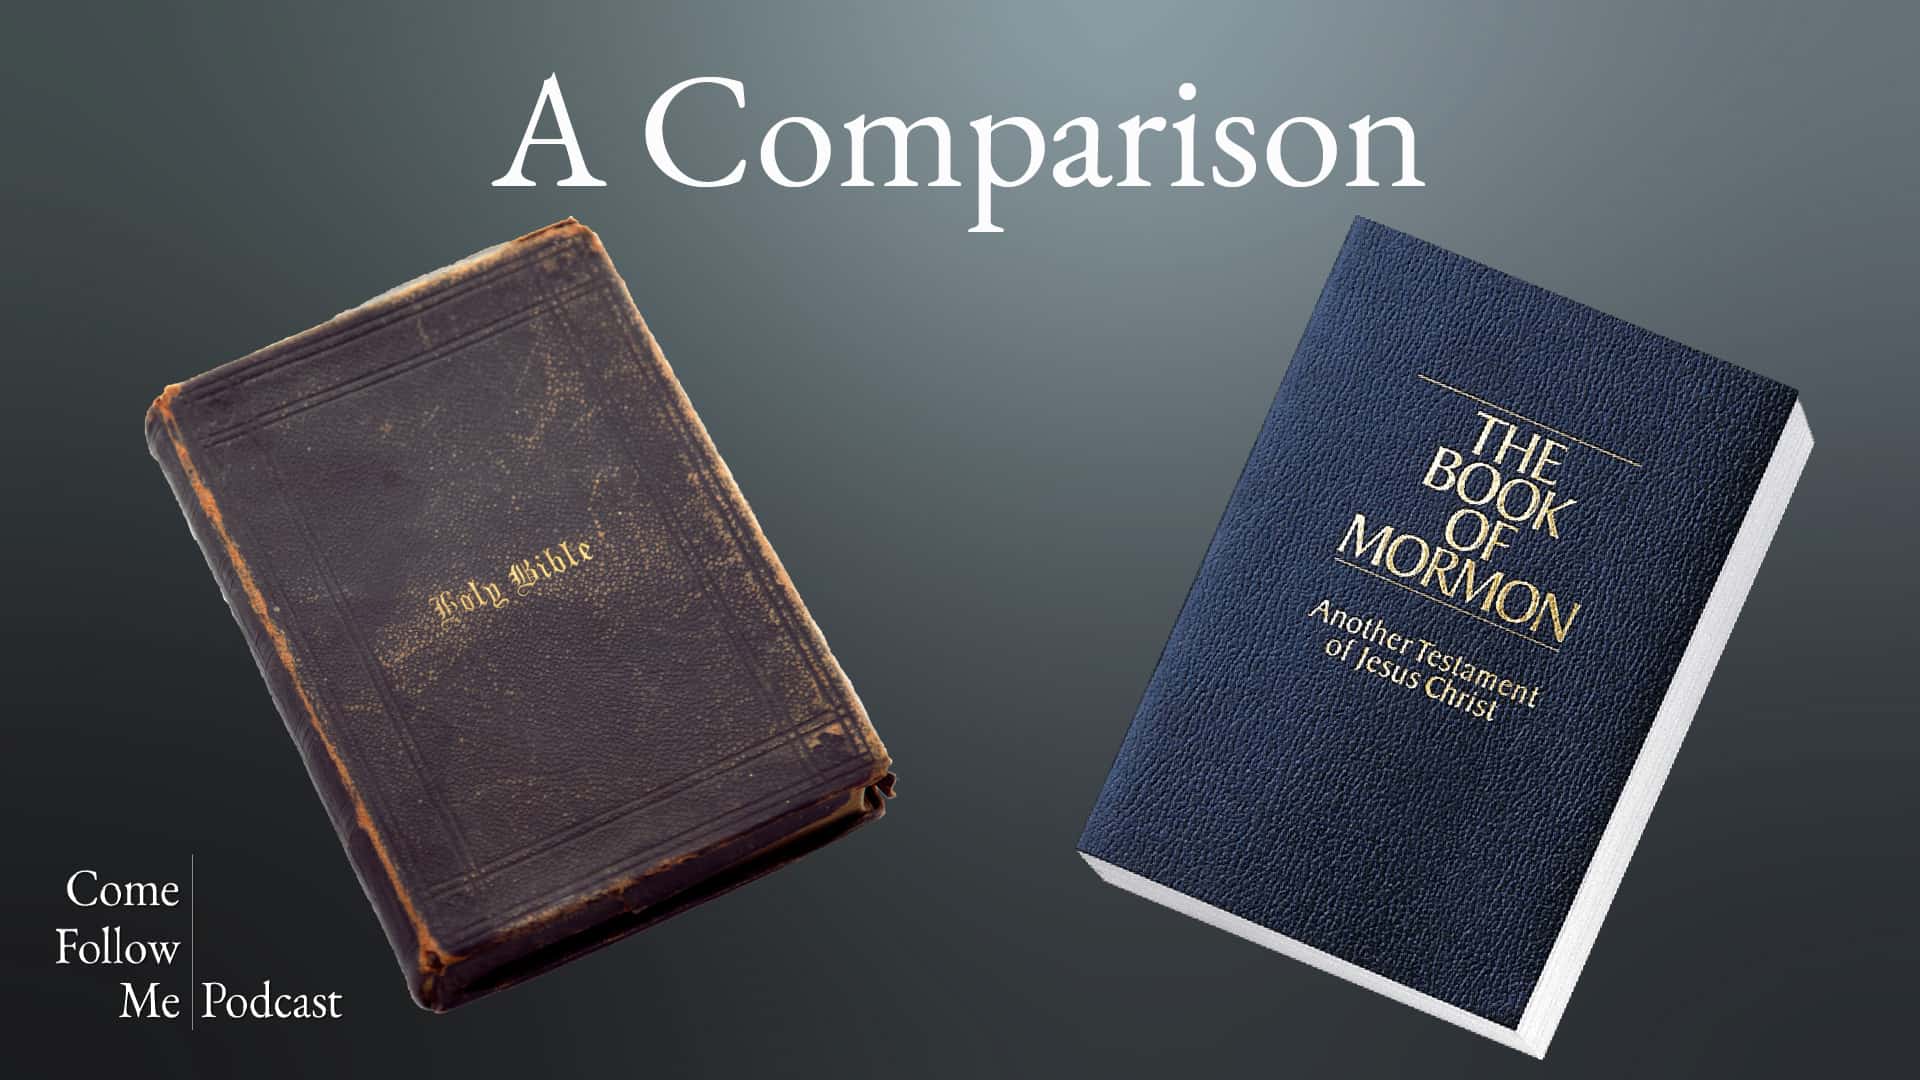 Compaing the Book of Mormon with the Bible